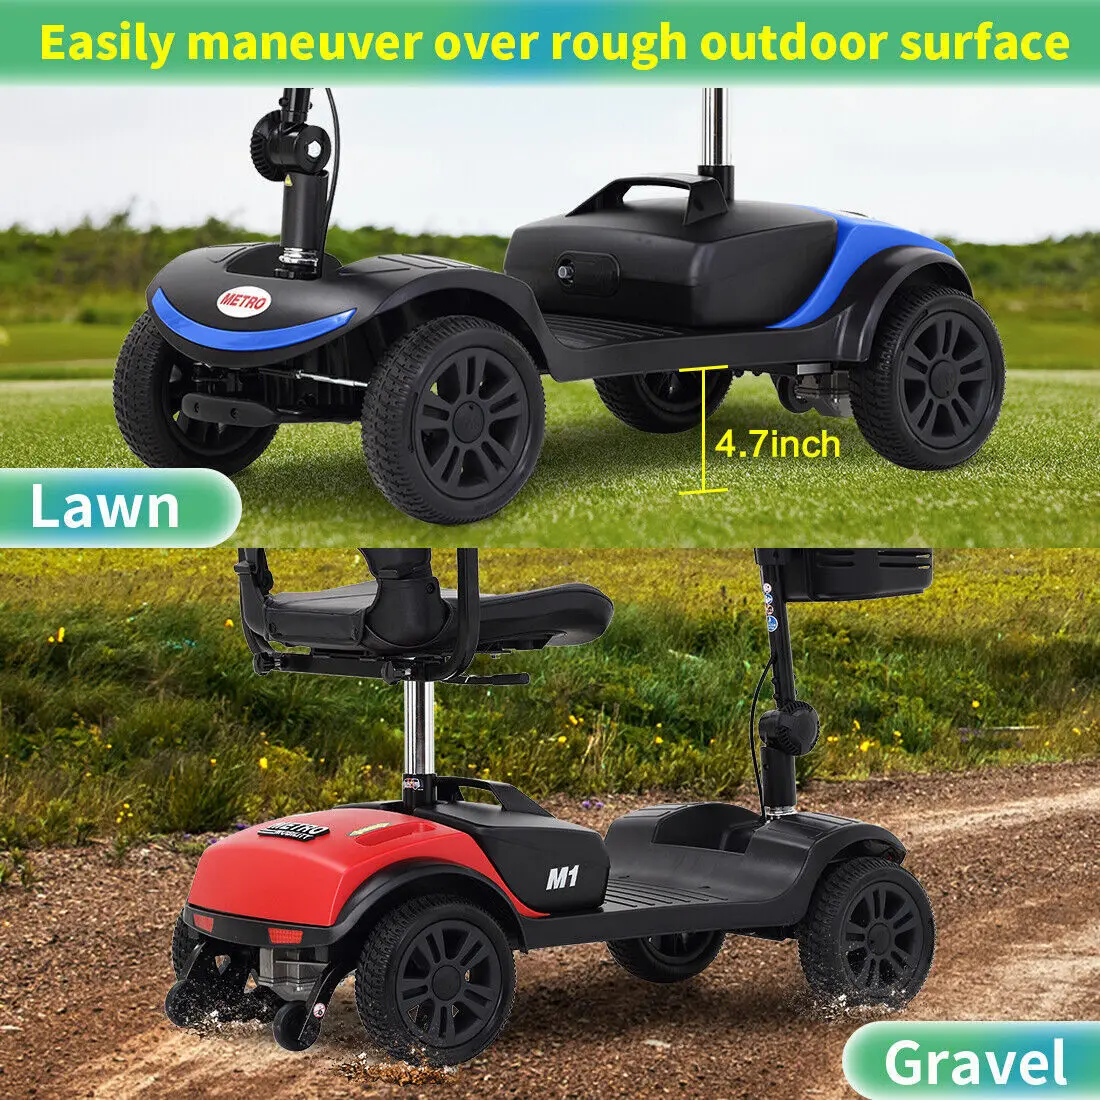 

US Fast shipping 4 Wheel Mobility Scooter Chair Four Wheel Electric Car motorcycle Compact for Travel Adults Elderly Senior